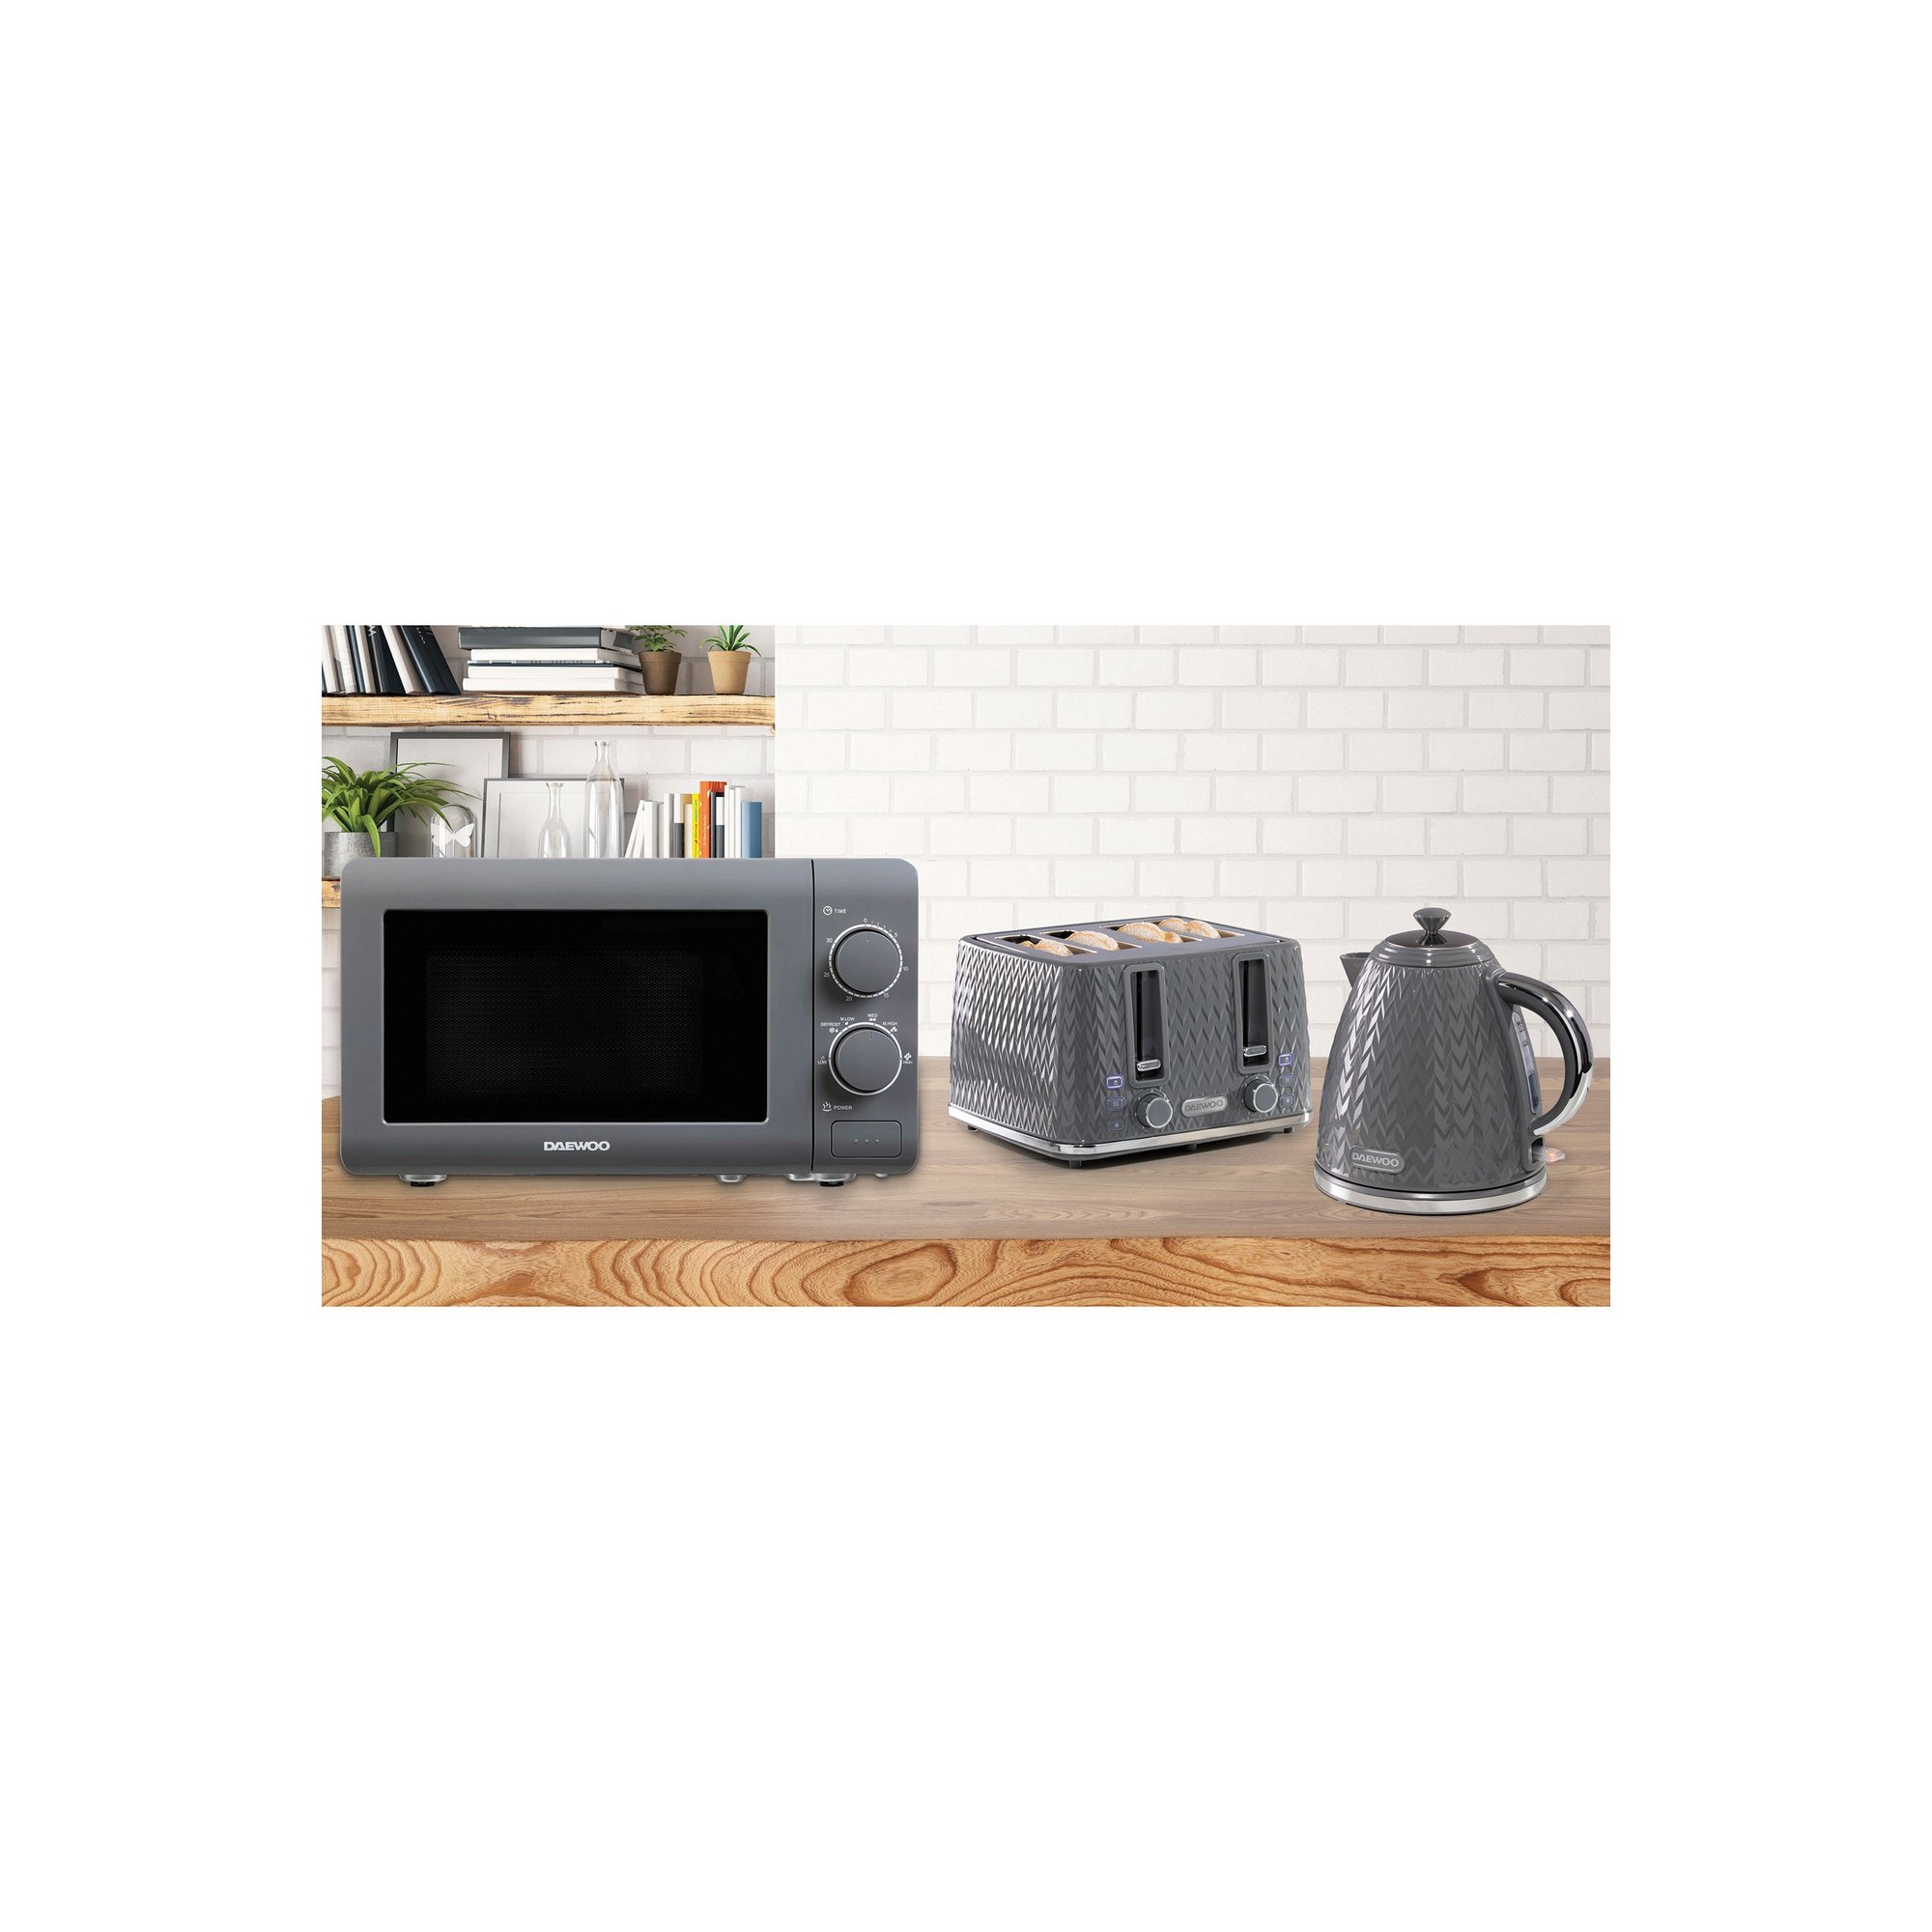 Daewoo Argyle 4-Slice Toaster, Kettle and Microwave Triple Pack